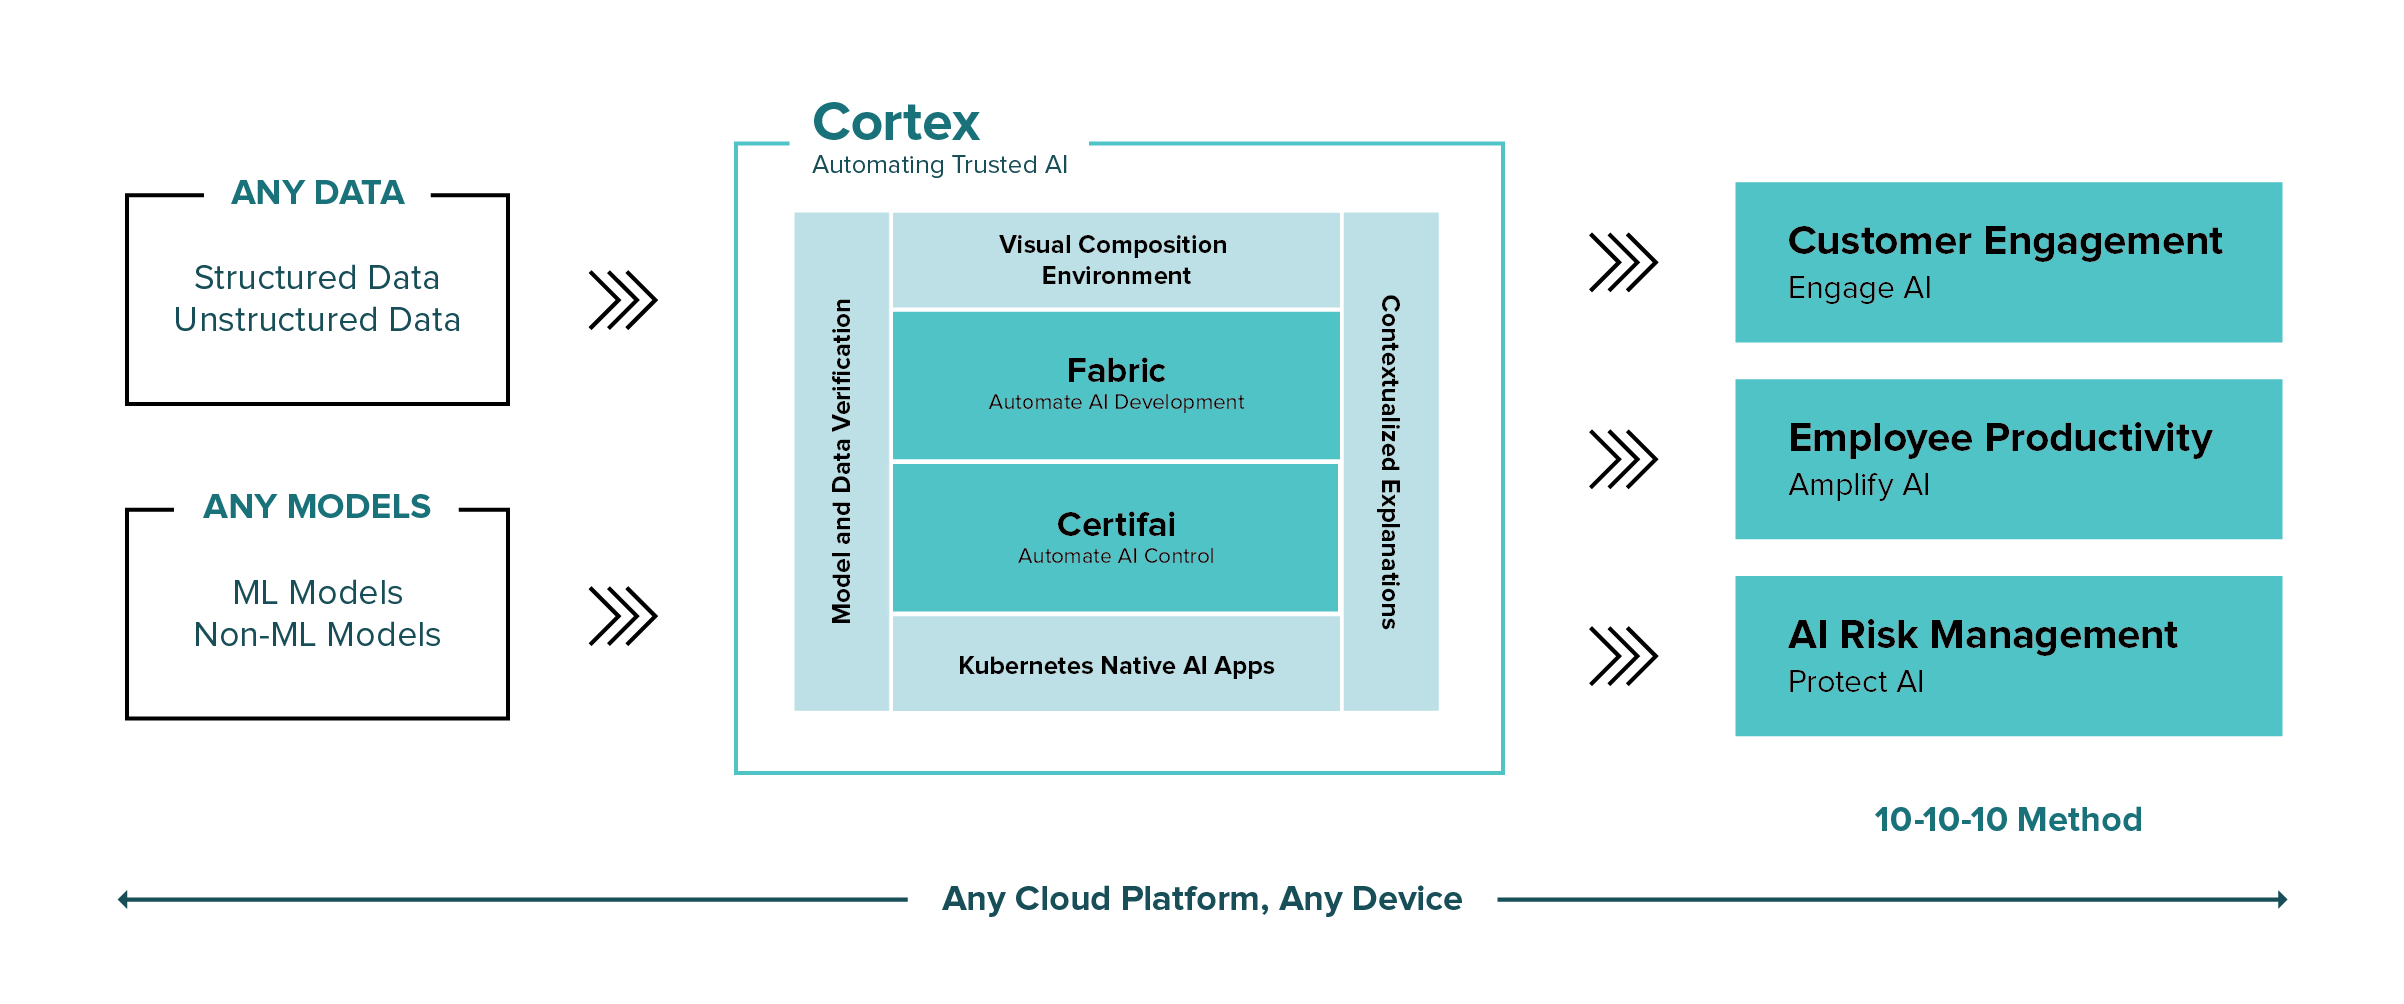 Cortex product stack